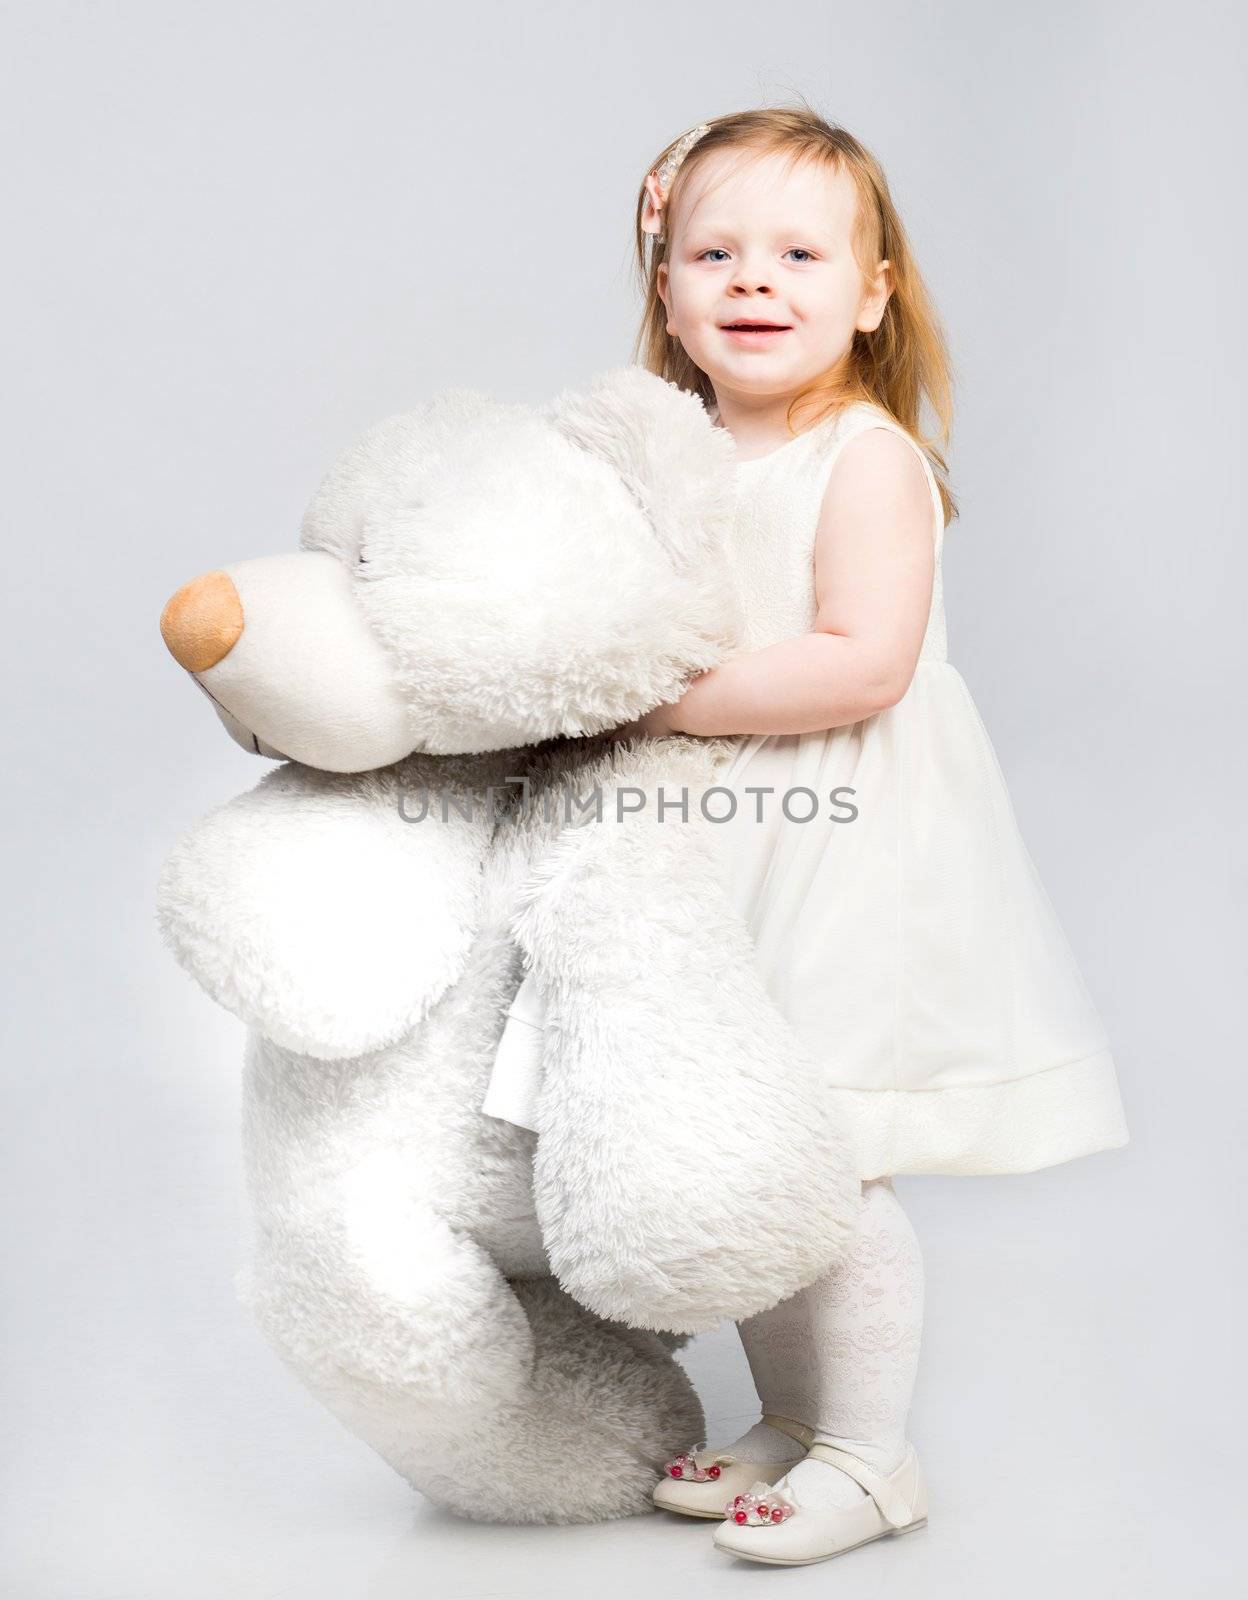 Little girl with toy bear on light background